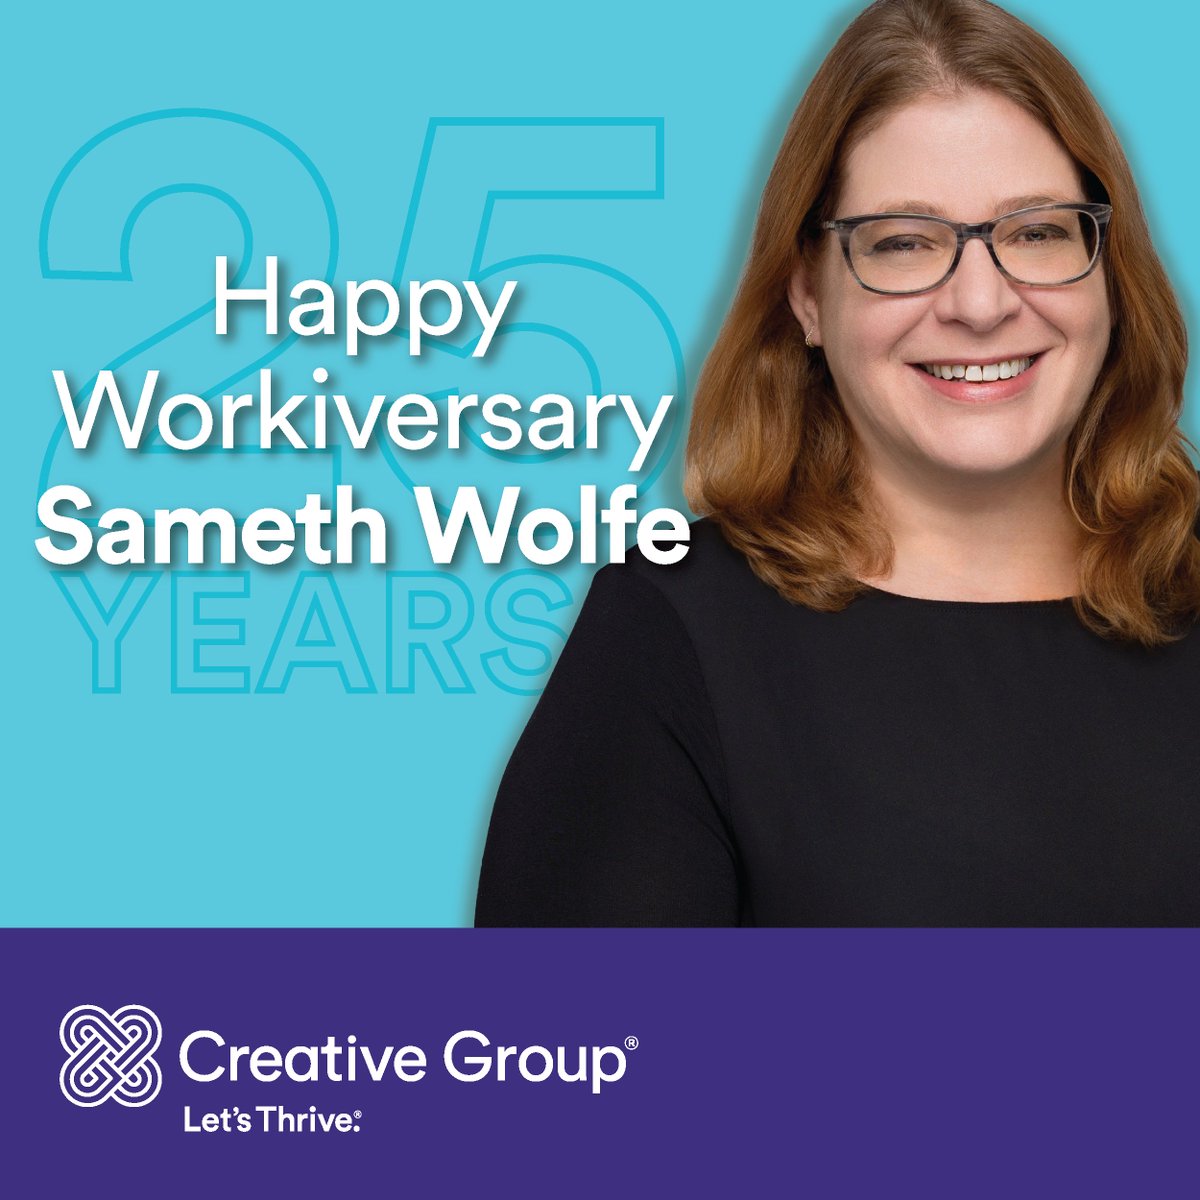 Congratulations and happy anniversary to Sameth Wolfe, Program Accounting Partner at Creative Group! We’re so fortunate to have her on our team! 🎉

#EventPlanning #EventProfs #LetsThrive